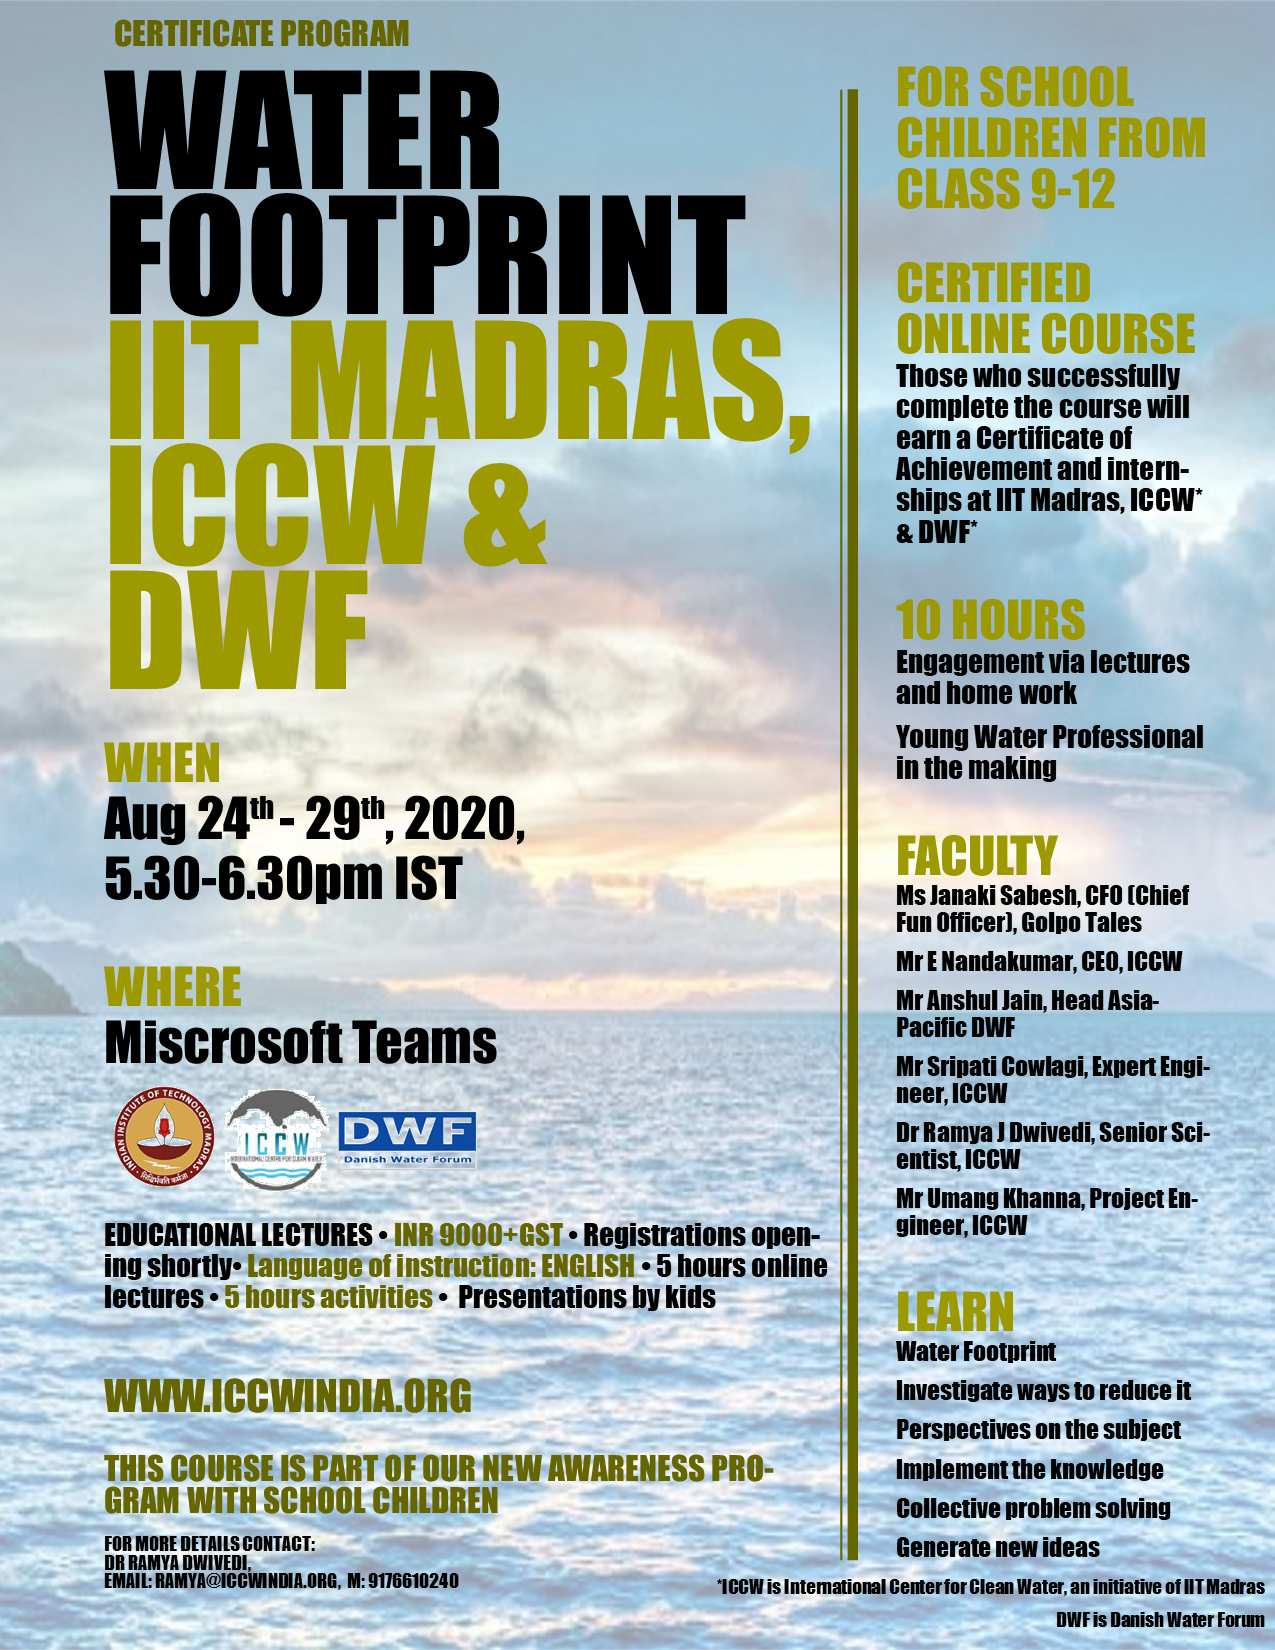 Visit www.iccwinidia.org for more information on the certificate program for school children on WATER FOOTPRINT by IIT Madras, ICCW and DWF.